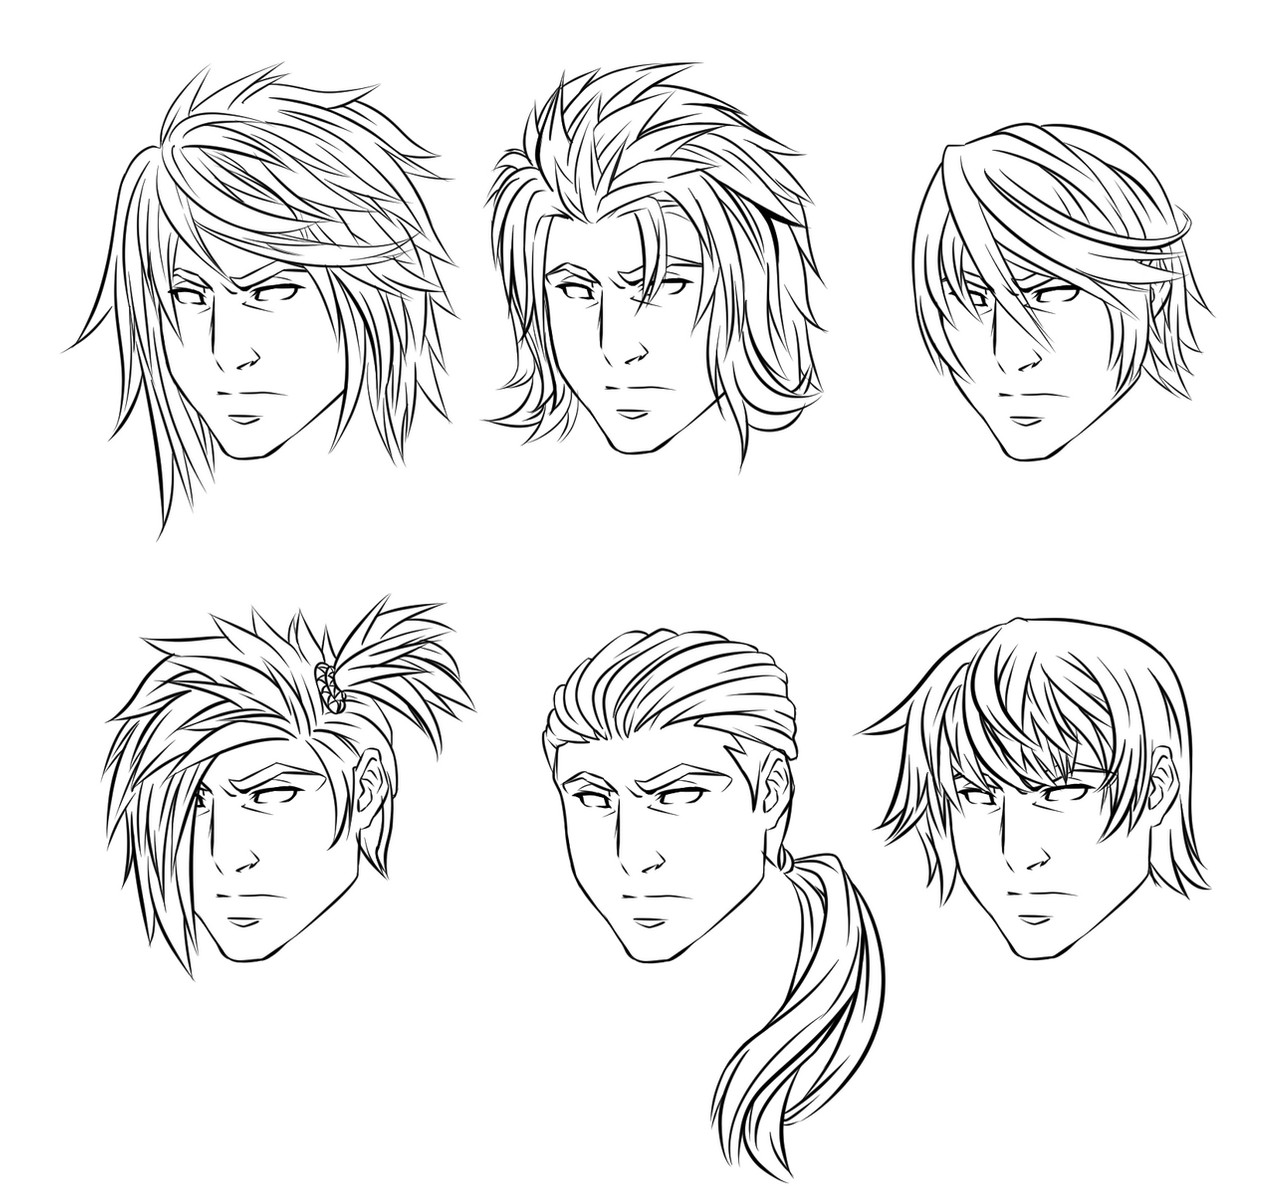 Anime Guy Haircuts
 Anime Male Hairstyles by CrimsonCypher on DeviantArt